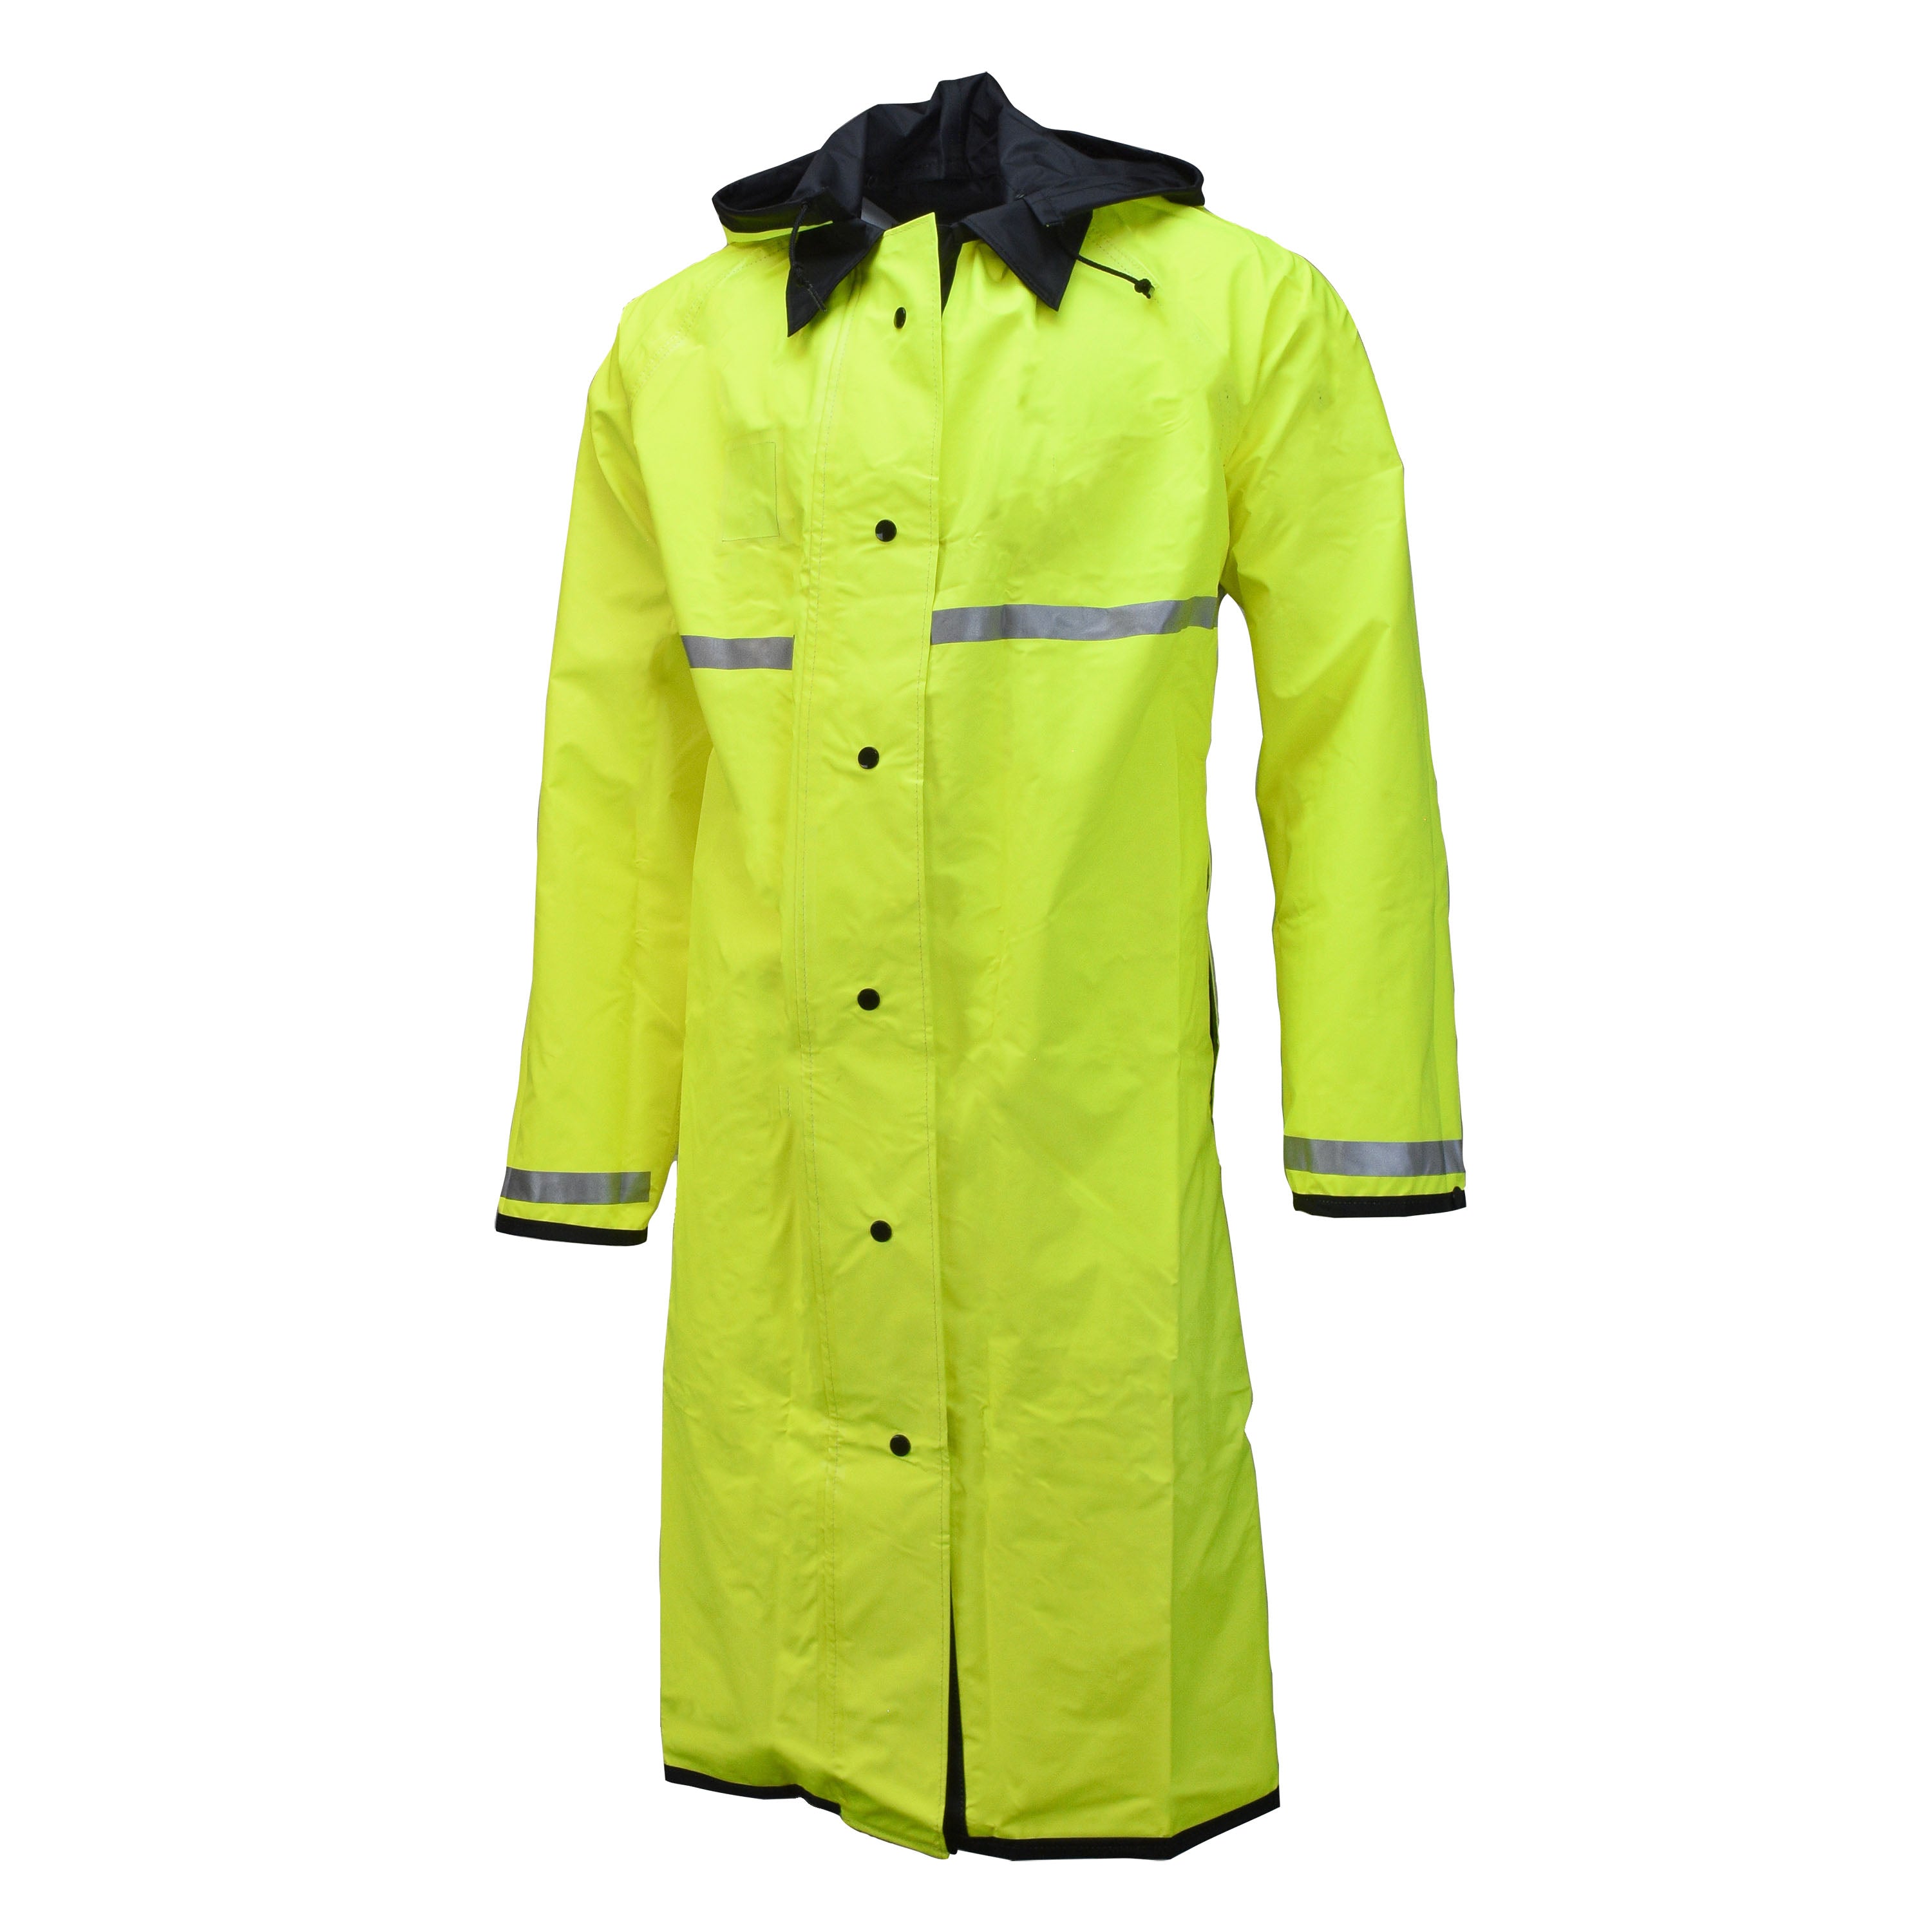 Neese 475RCH3M Duty Series Reversible Coat with 3M Reflective Taping-eSafety Supplies, Inc